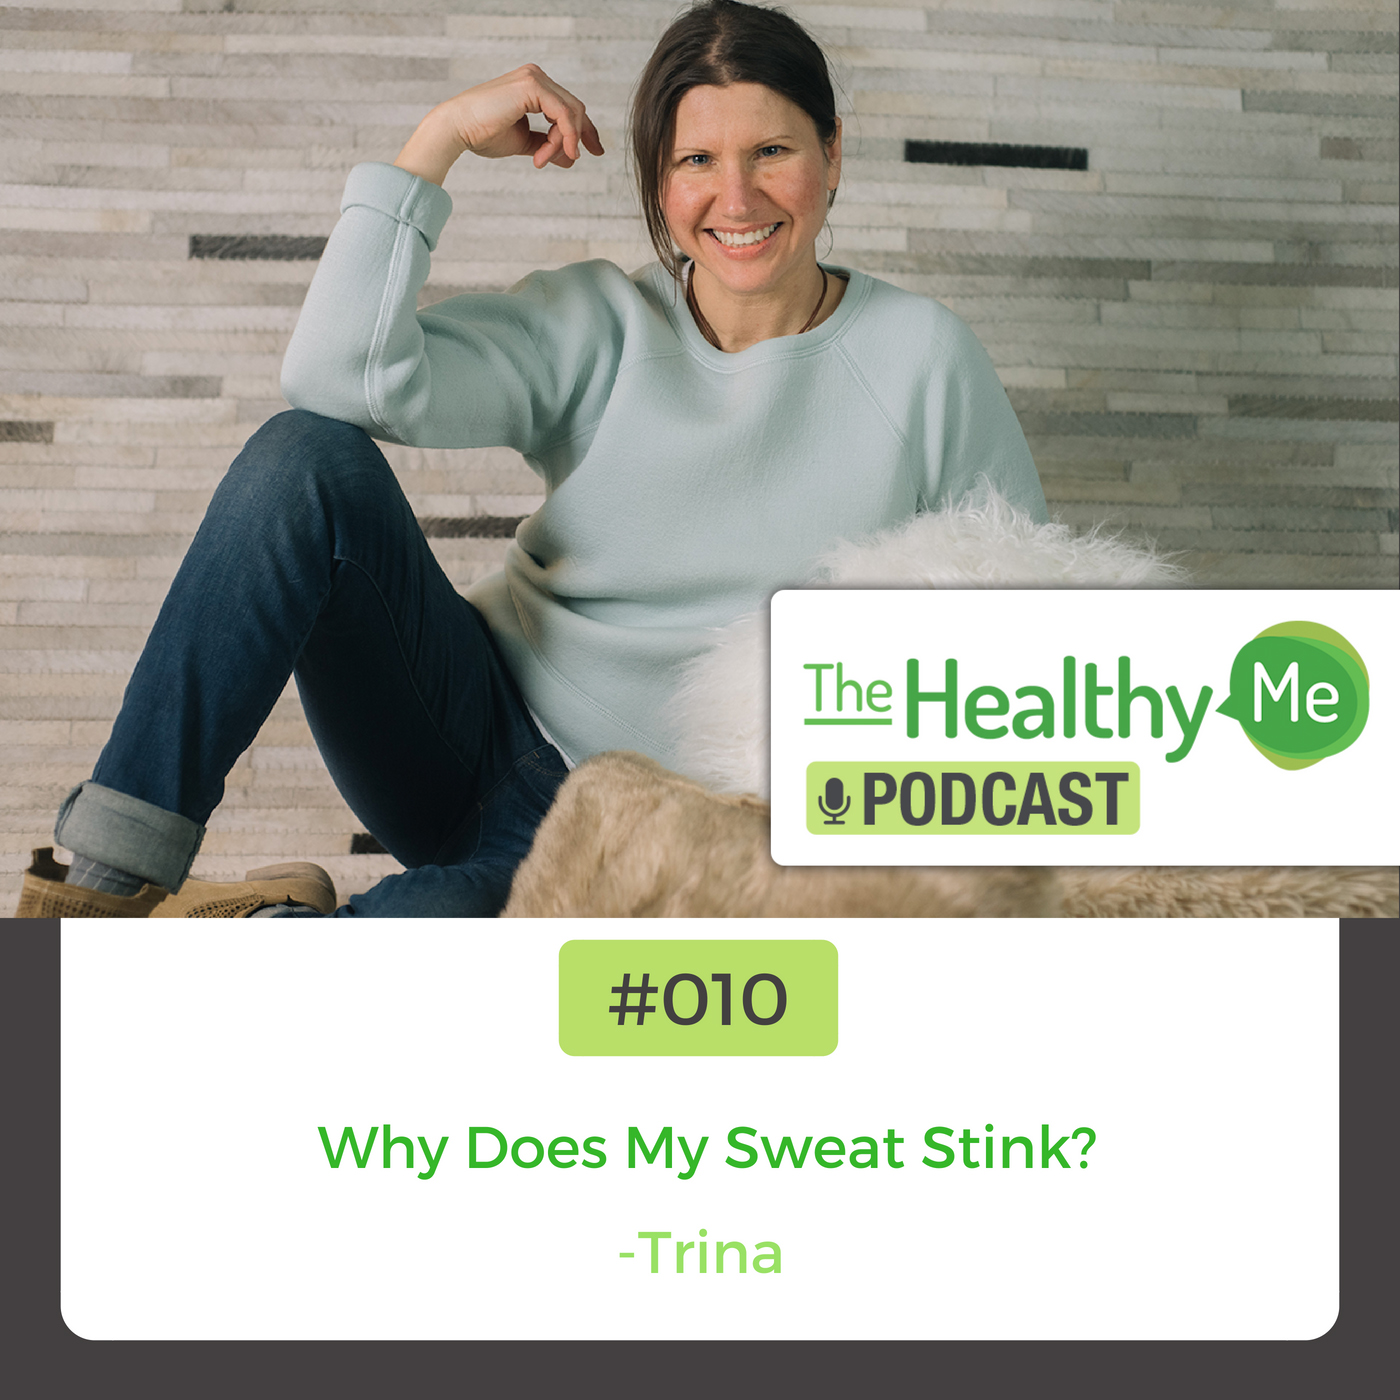 Why Does My Sweat Stink? | The Healthy Me Podcast Episode 010